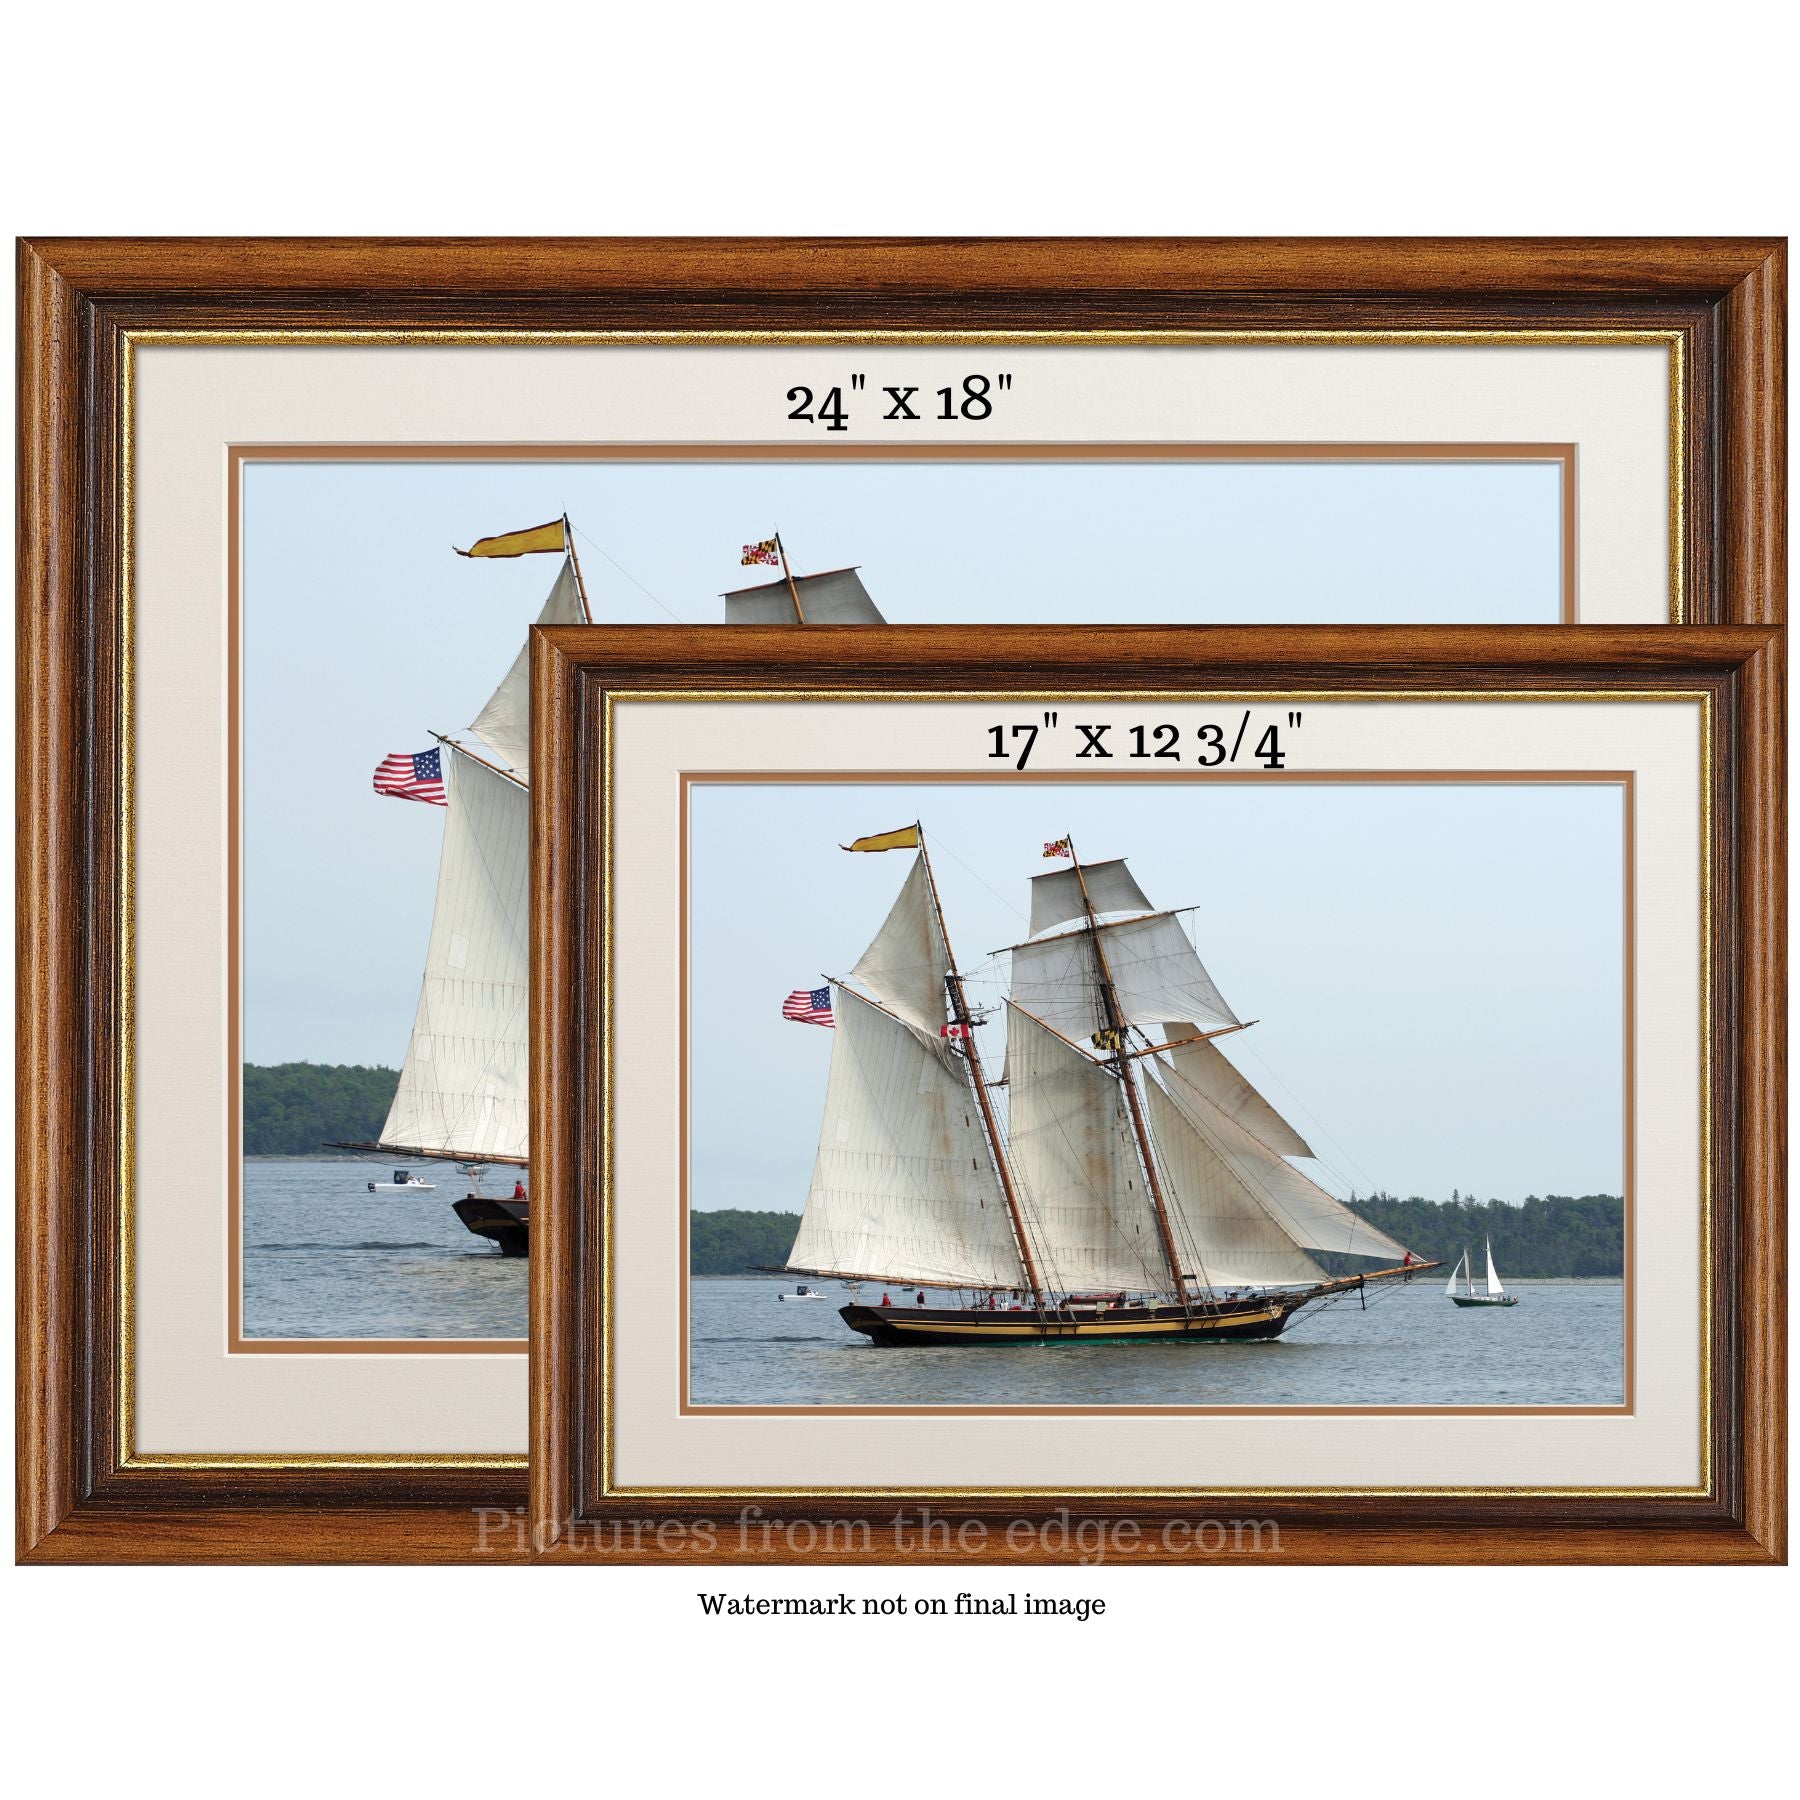 BeMoved by Tallship Sailing Poster. Movable and Removable!